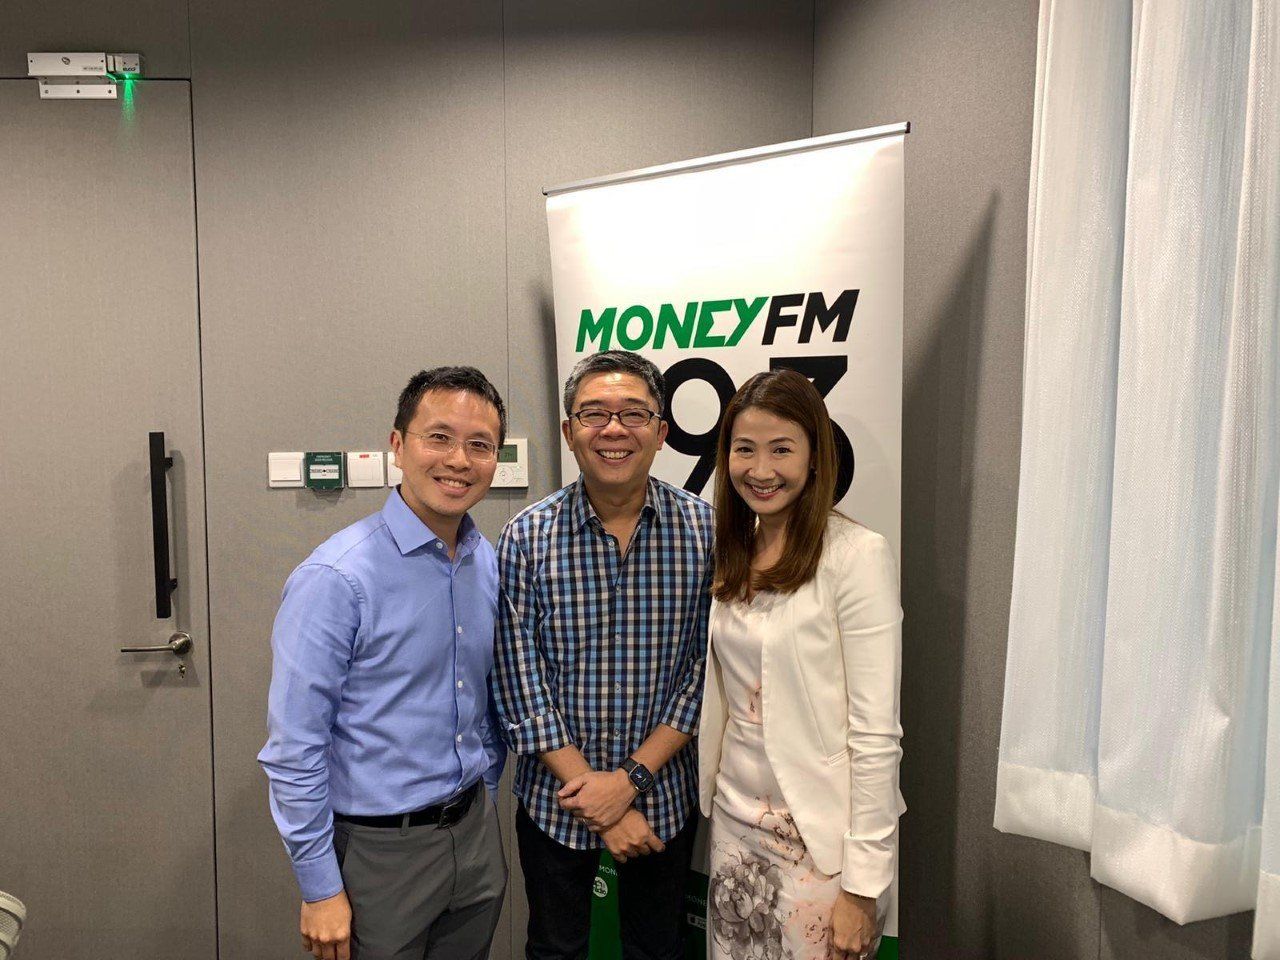 Dr Dean Koh on Importance Of Lifelong Learning In The Healthcare Sector - MONEY FM 89.3